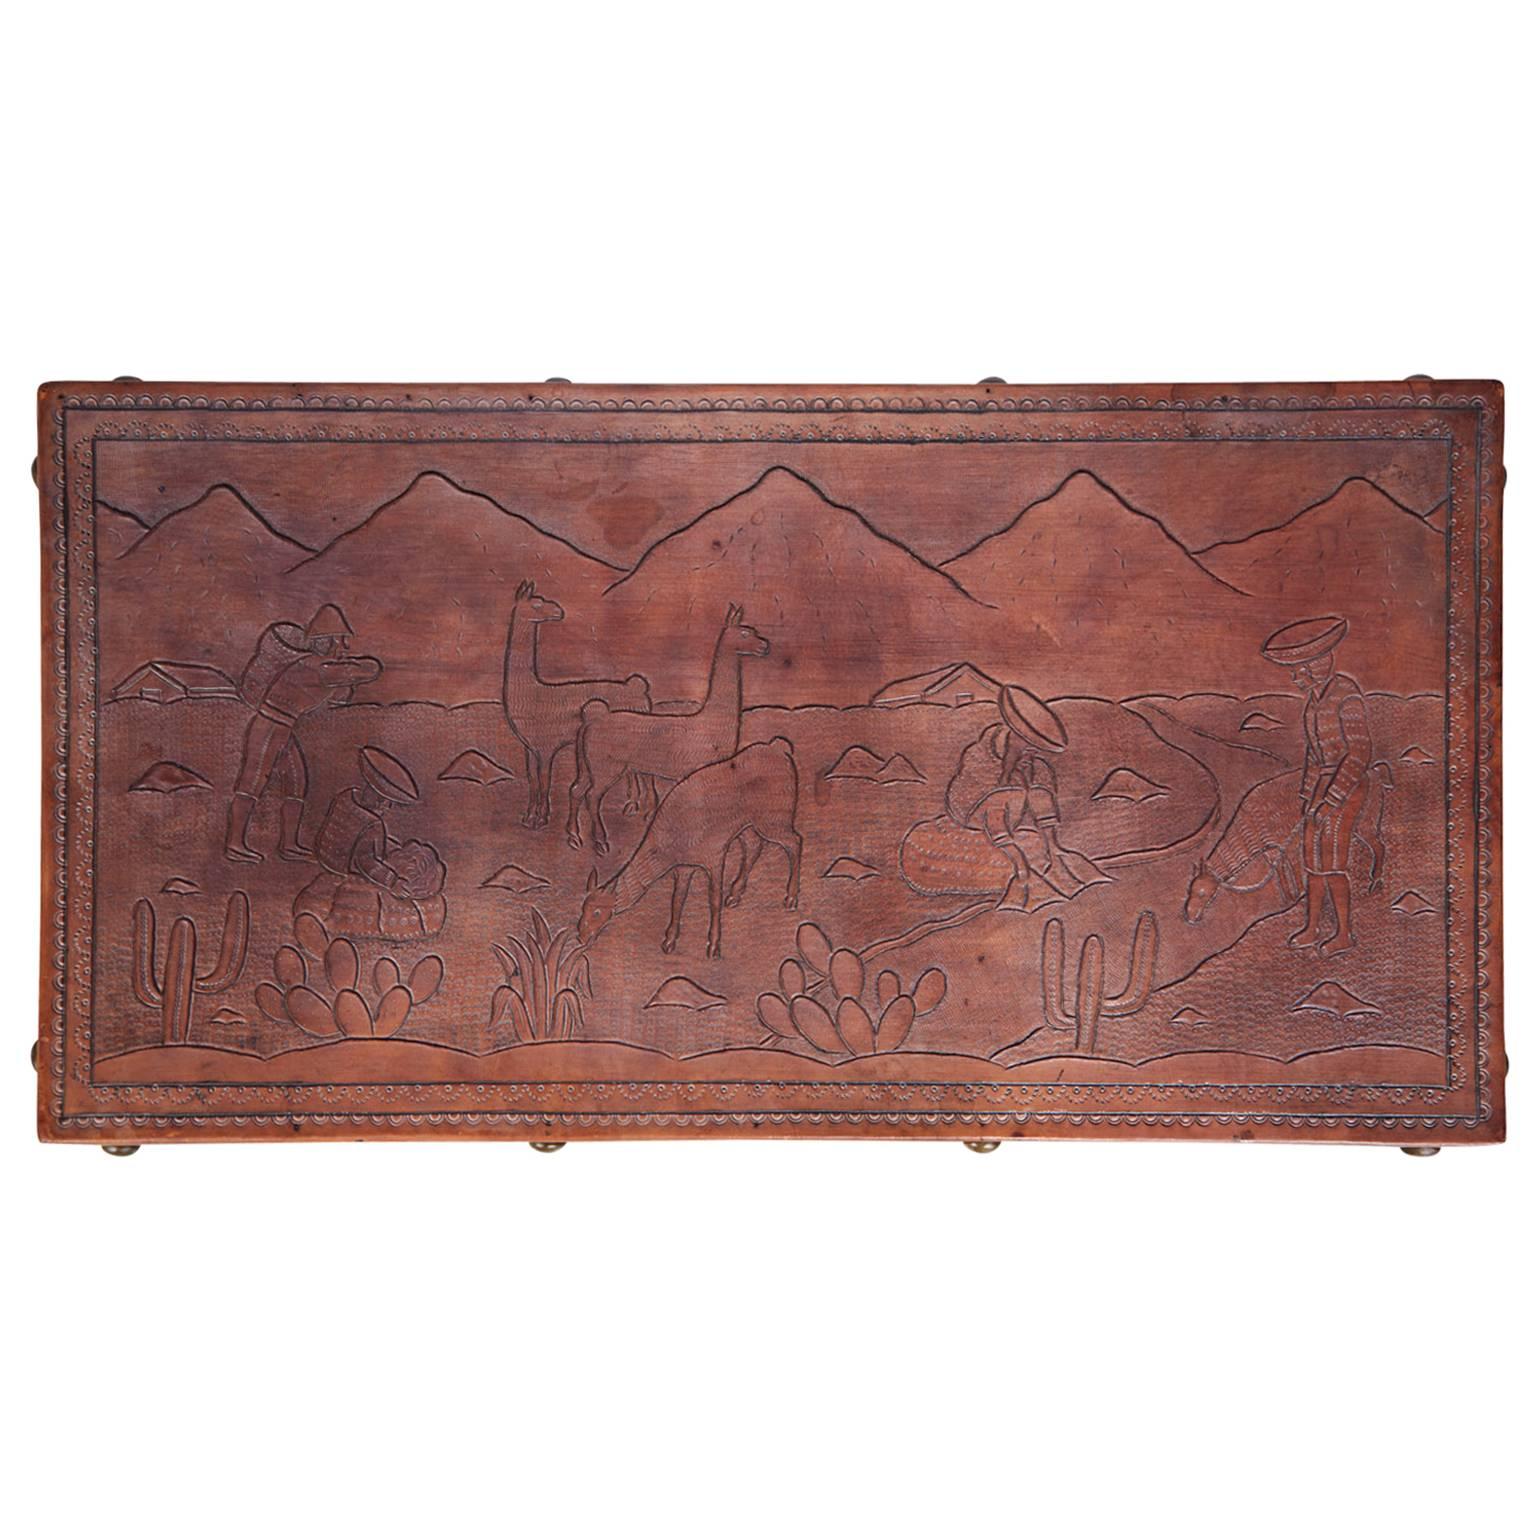 Spanish Colonial Peruvian Tooled Leather Bench or Coffee Table with South American Landscape